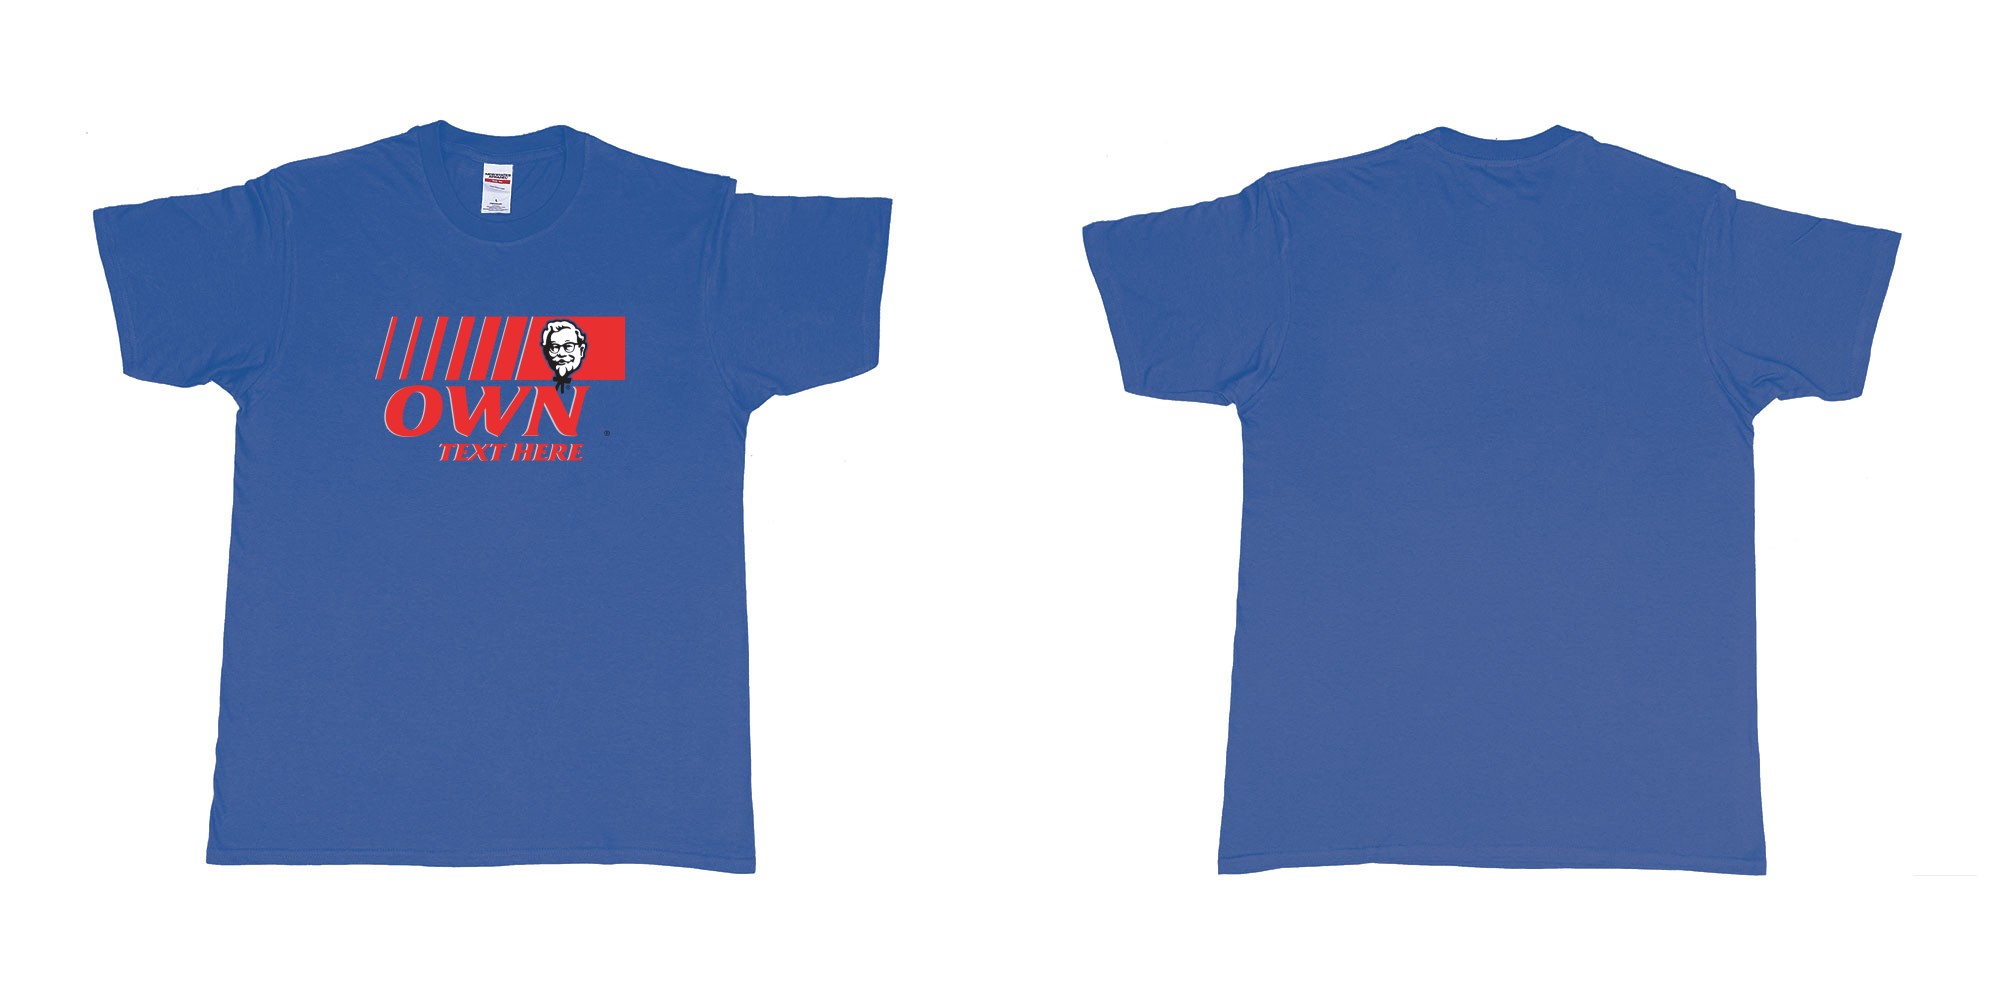 Custom tshirt design KFC in fabric color royal-blue choice your own text made in Bali by The Pirate Way